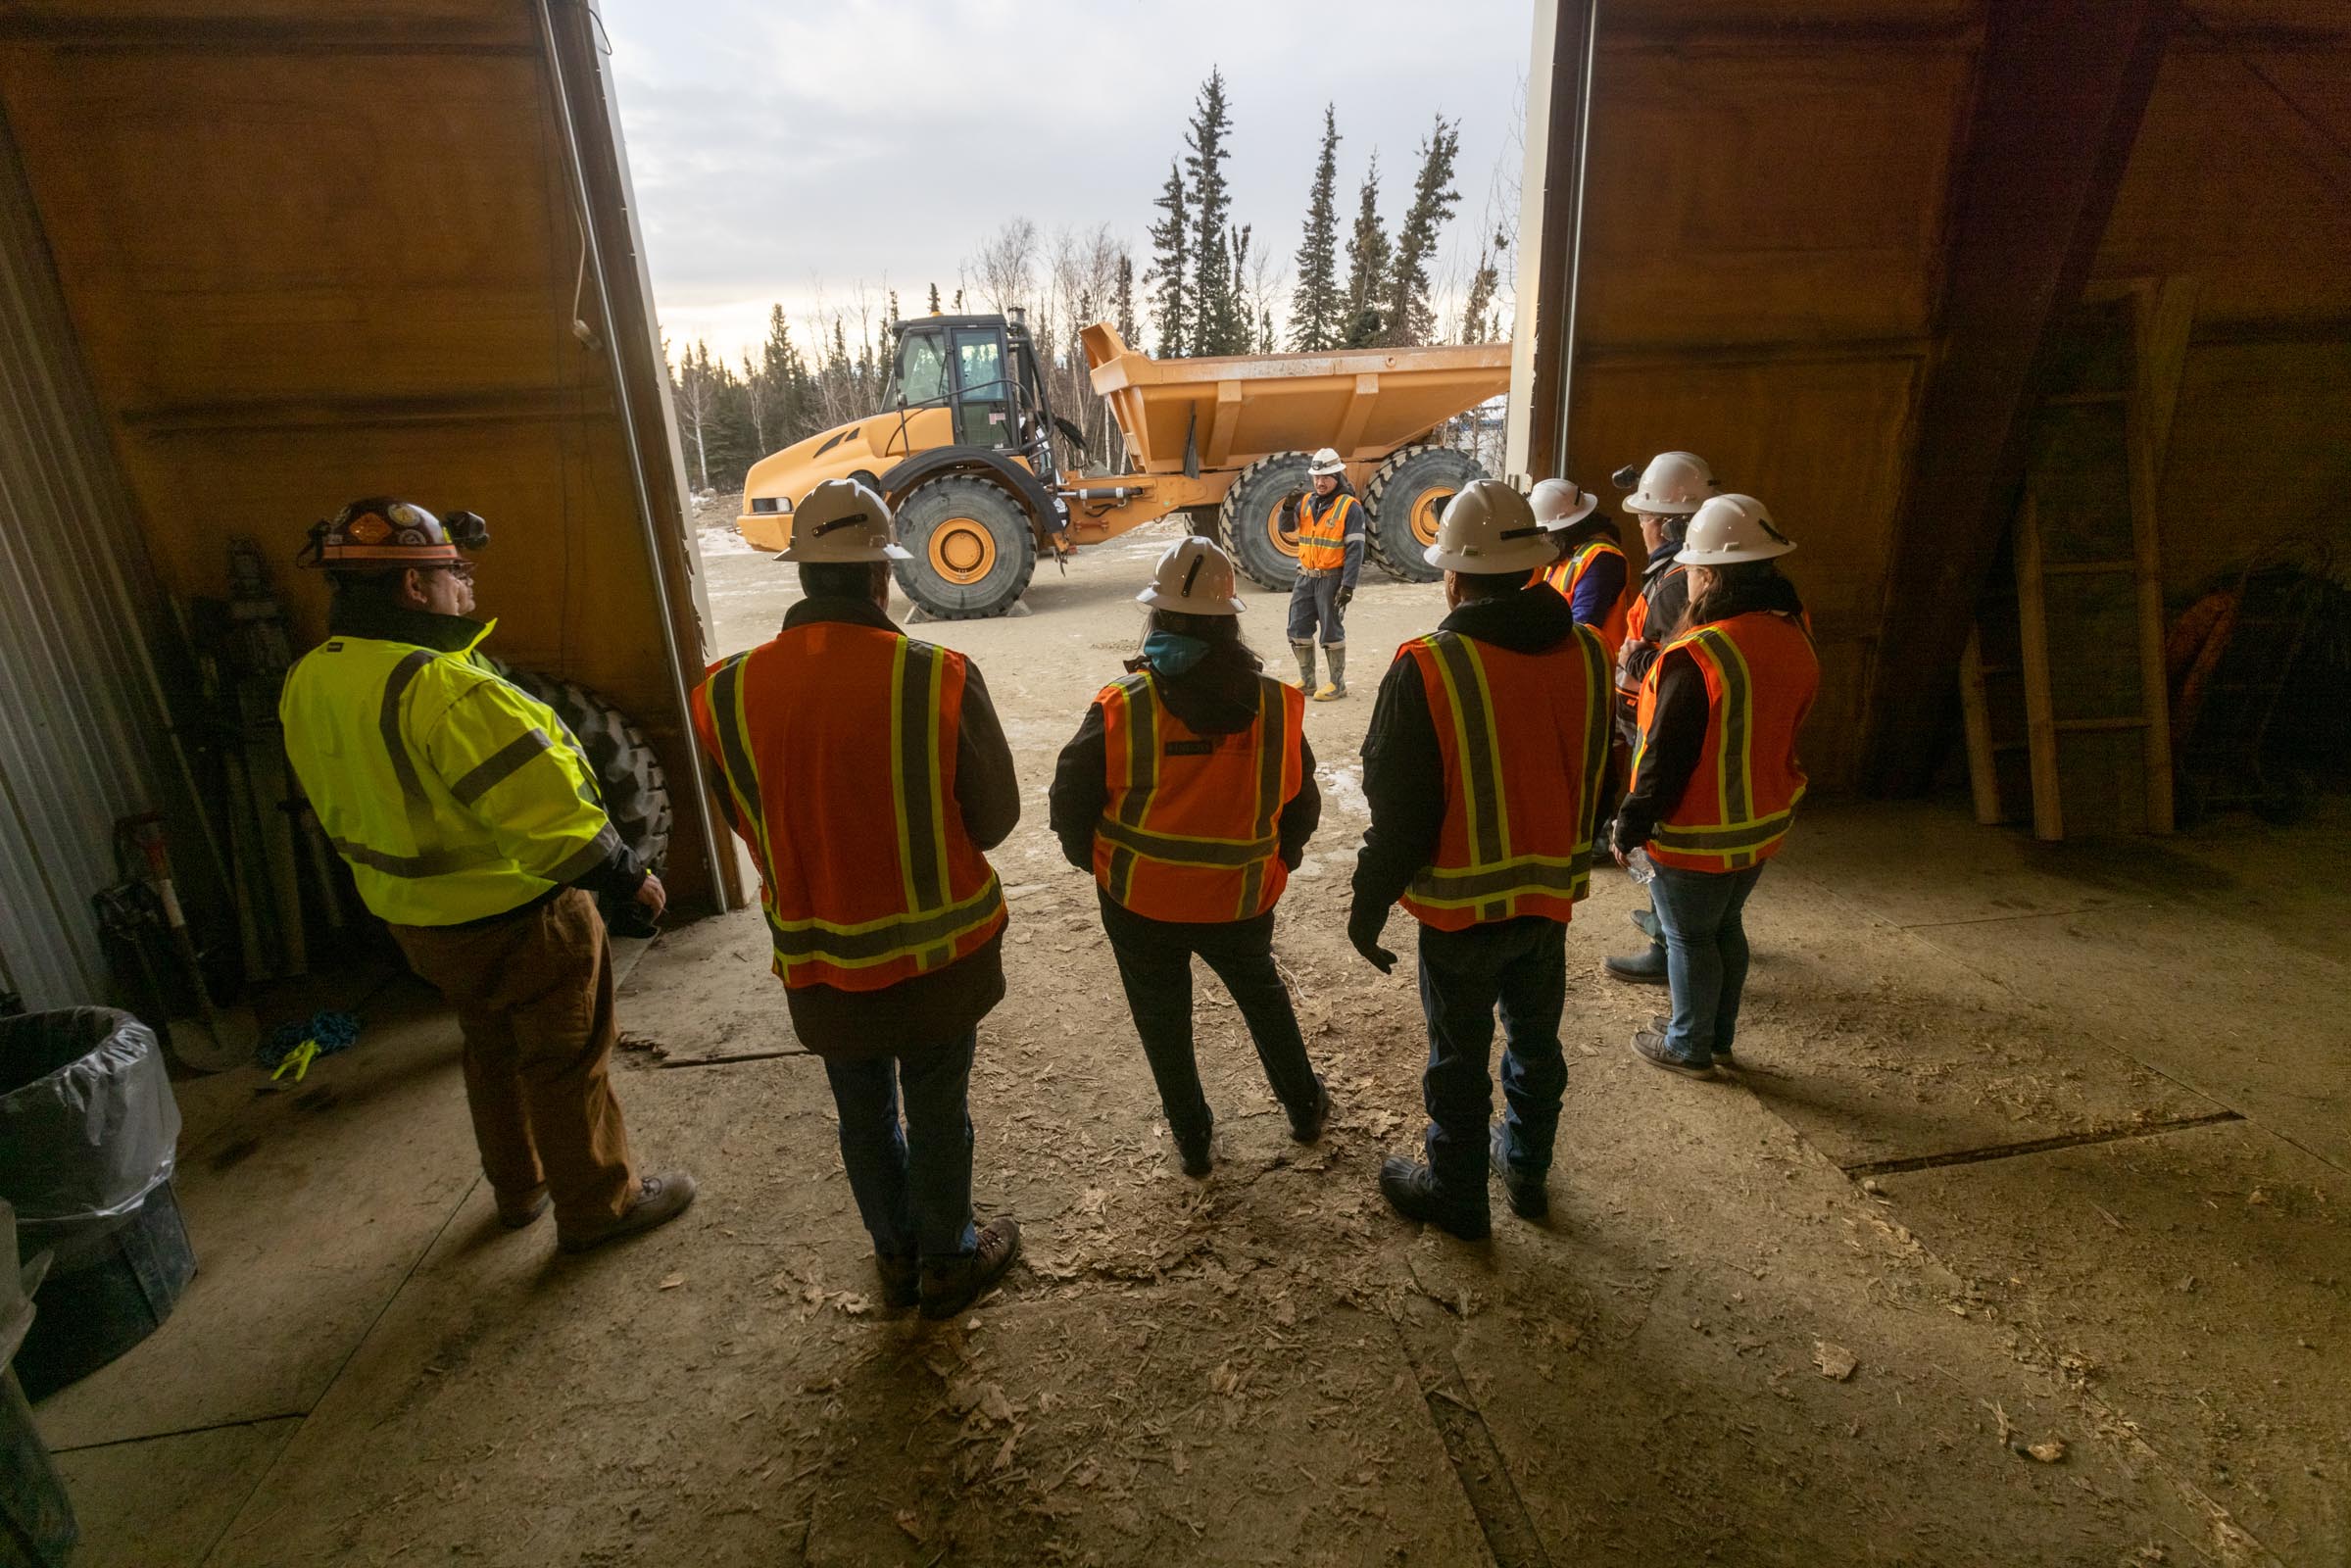 A group of people wearing reflective vests and hard hats listen to a student explain how to safely run heavy equipment.